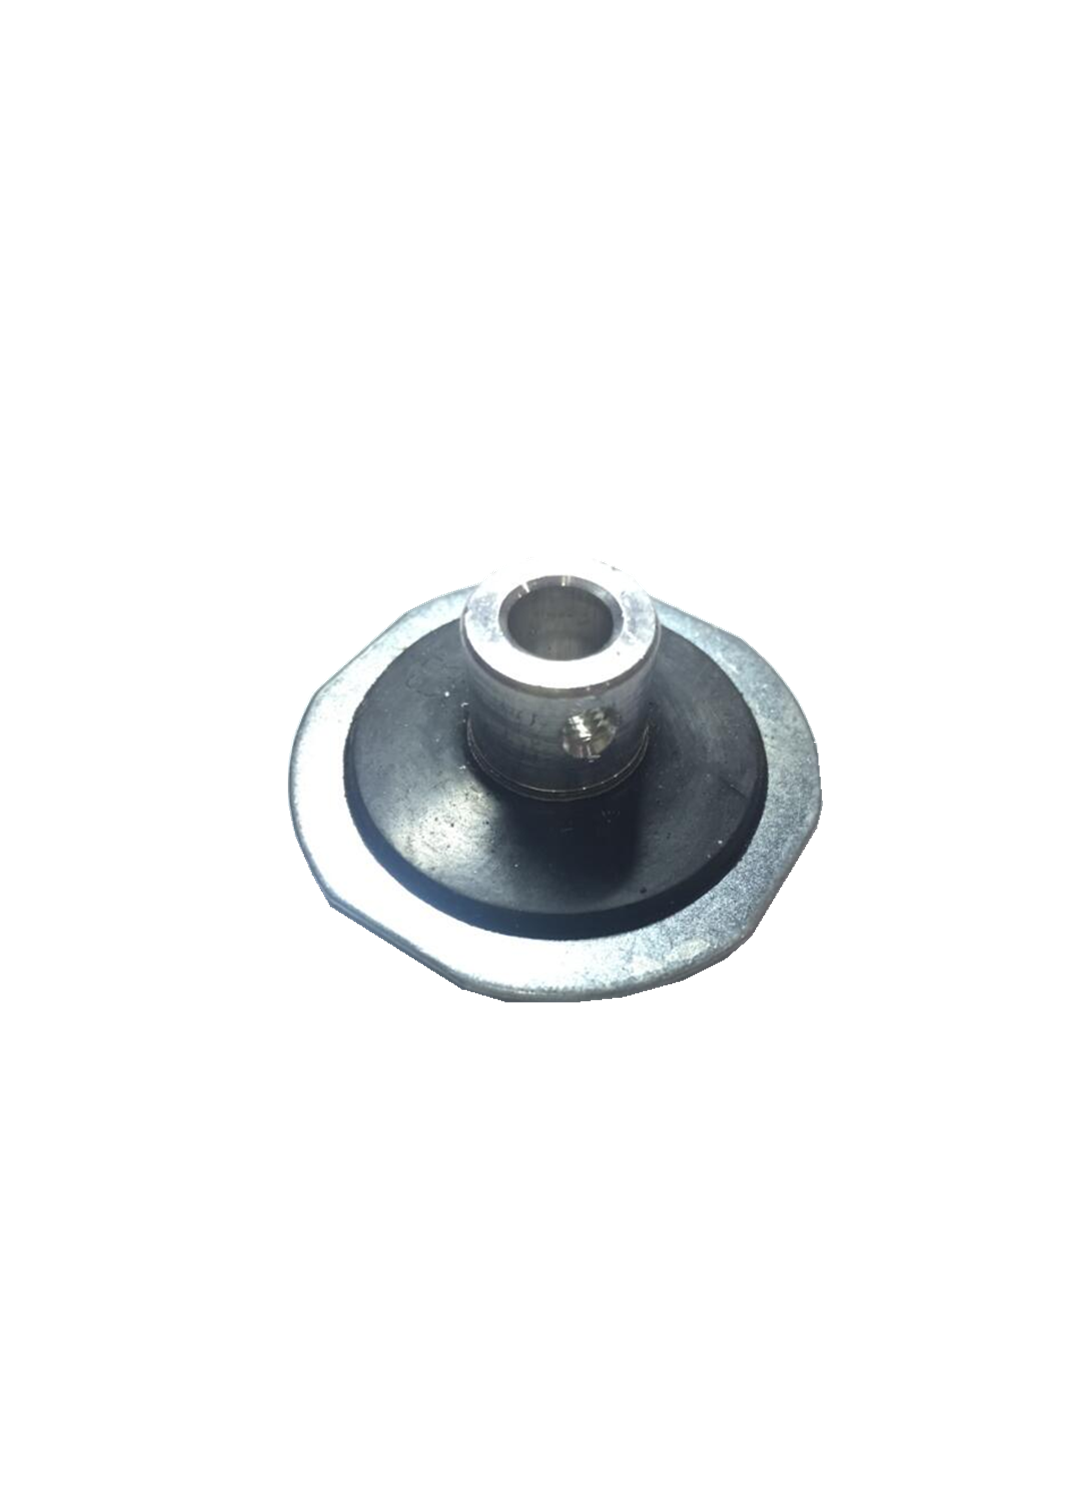 Metal & Rubber vibration isolator mounting bracket for air conditioner